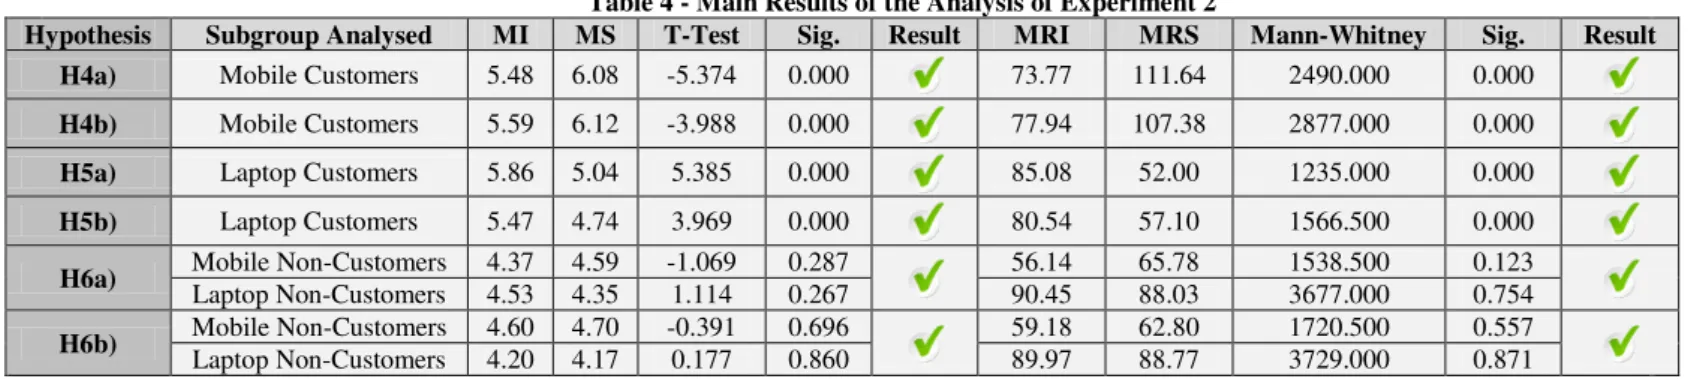 Table 4 - Main Results of the Analysis of Experiment 2 